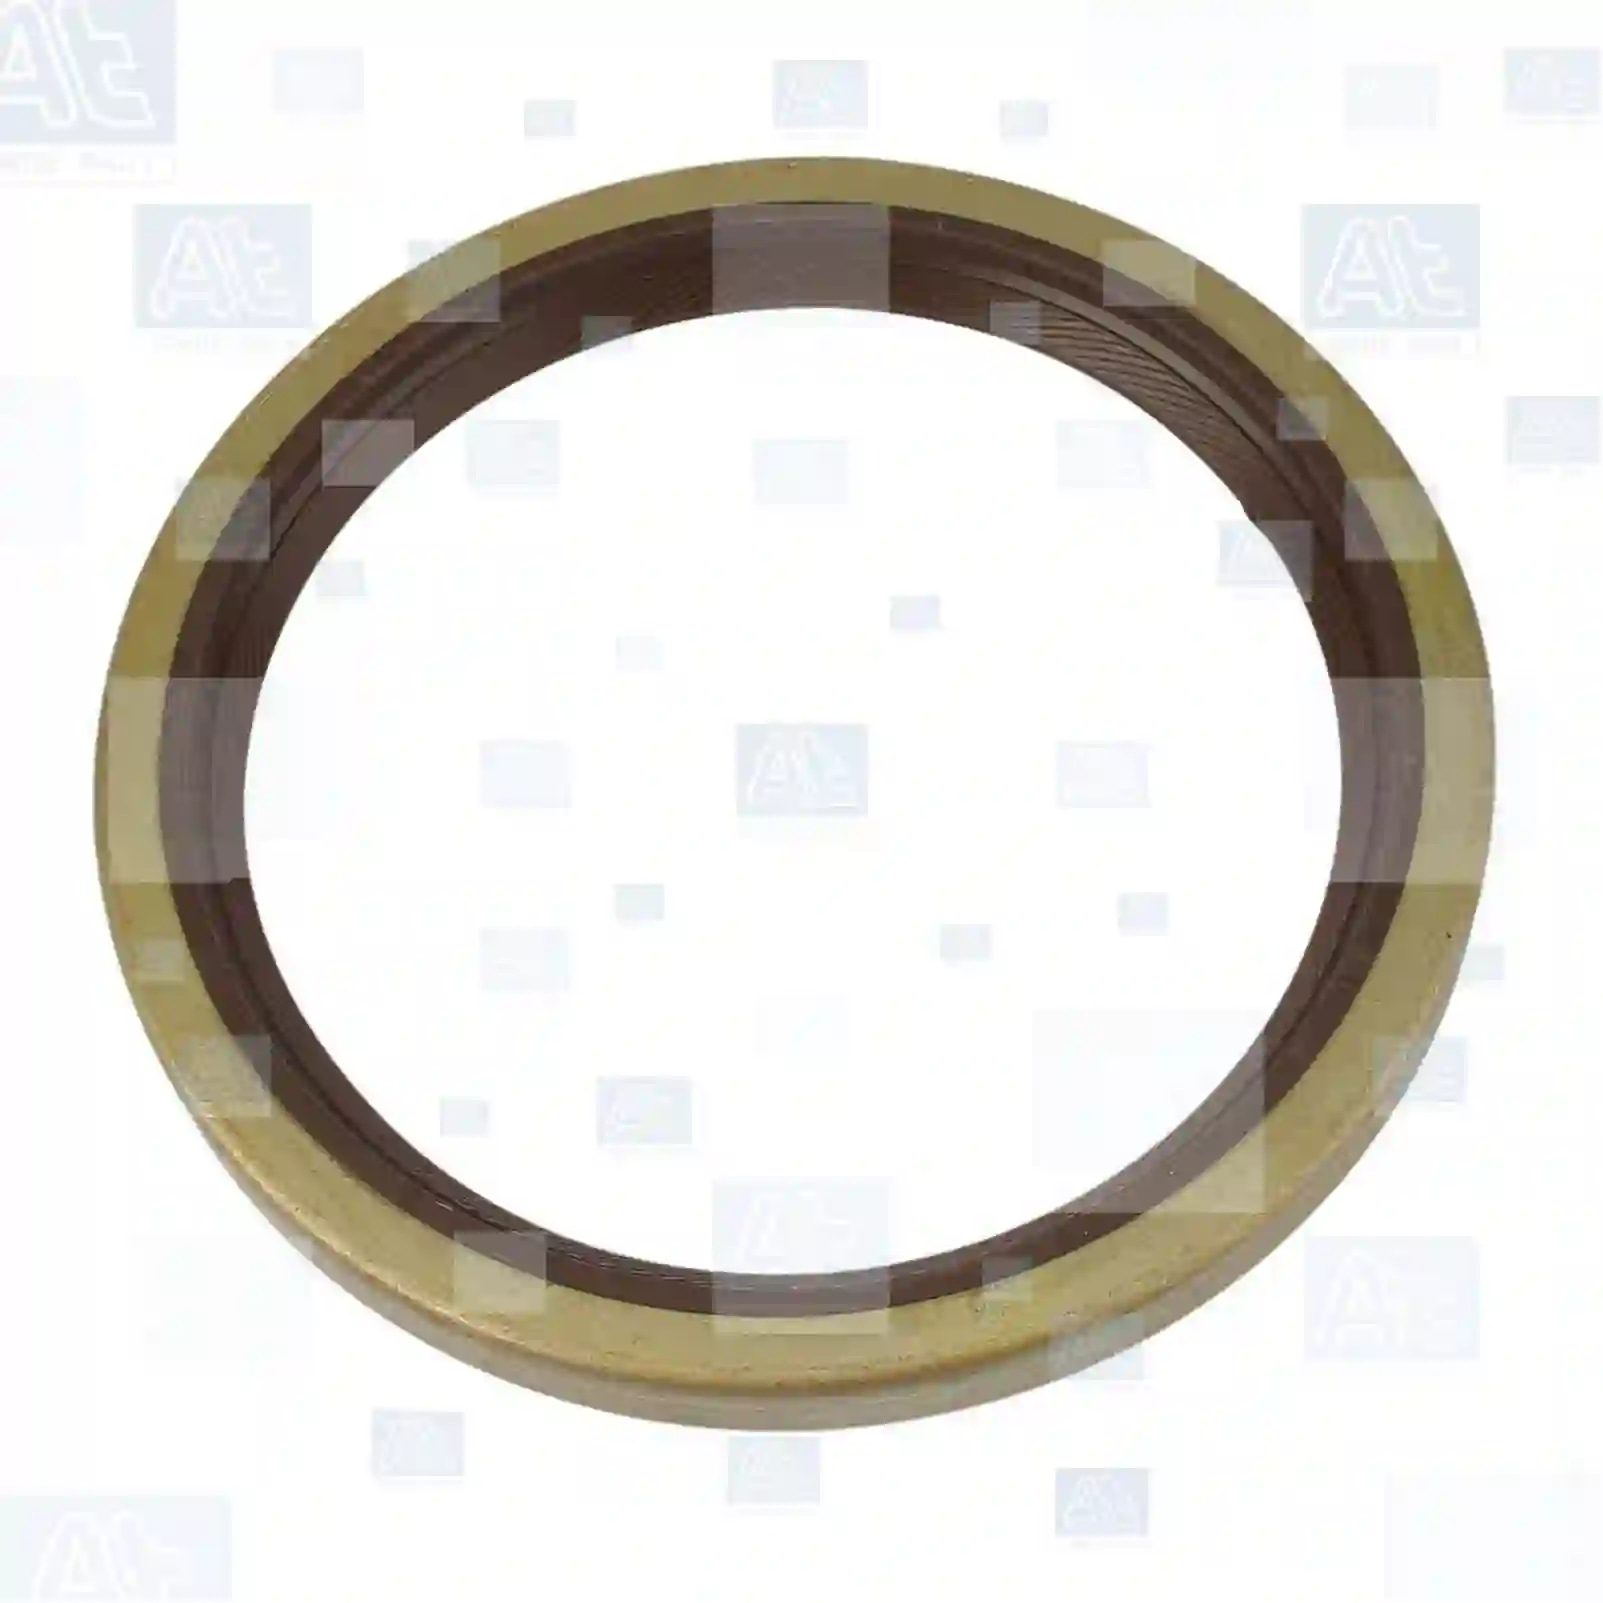 Oil seal, 77731956, 0140783, 140783, 609475, 693928, 42485827, 09931790, 42485827, 9931790, 06562890067, 81965010451, 81965010966, 81965020208, 81965020651, 81965020762, 81965020981, 85300013083, 85300018573, 90901802061, 3077366M1, 0049970647, 0049972246, 0069972246, 0069974147, 0069977046, 0069978647, 0079975947, 0089973347, 0129970647, 8129970647, 4753034000, 8129970647, 99100390703, 99112290702 ||  77731956 At Spare Part | Engine, Accelerator Pedal, Camshaft, Connecting Rod, Crankcase, Crankshaft, Cylinder Head, Engine Suspension Mountings, Exhaust Manifold, Exhaust Gas Recirculation, Filter Kits, Flywheel Housing, General Overhaul Kits, Engine, Intake Manifold, Oil Cleaner, Oil Cooler, Oil Filter, Oil Pump, Oil Sump, Piston & Liner, Sensor & Switch, Timing Case, Turbocharger, Cooling System, Belt Tensioner, Coolant Filter, Coolant Pipe, Corrosion Prevention Agent, Drive, Expansion Tank, Fan, Intercooler, Monitors & Gauges, Radiator, Thermostat, V-Belt / Timing belt, Water Pump, Fuel System, Electronical Injector Unit, Feed Pump, Fuel Filter, cpl., Fuel Gauge Sender,  Fuel Line, Fuel Pump, Fuel Tank, Injection Line Kit, Injection Pump, Exhaust System, Clutch & Pedal, Gearbox, Propeller Shaft, Axles, Brake System, Hubs & Wheels, Suspension, Leaf Spring, Universal Parts / Accessories, Steering, Electrical System, Cabin Oil seal, 77731956, 0140783, 140783, 609475, 693928, 42485827, 09931790, 42485827, 9931790, 06562890067, 81965010451, 81965010966, 81965020208, 81965020651, 81965020762, 81965020981, 85300013083, 85300018573, 90901802061, 3077366M1, 0049970647, 0049972246, 0069972246, 0069974147, 0069977046, 0069978647, 0079975947, 0089973347, 0129970647, 8129970647, 4753034000, 8129970647, 99100390703, 99112290702 ||  77731956 At Spare Part | Engine, Accelerator Pedal, Camshaft, Connecting Rod, Crankcase, Crankshaft, Cylinder Head, Engine Suspension Mountings, Exhaust Manifold, Exhaust Gas Recirculation, Filter Kits, Flywheel Housing, General Overhaul Kits, Engine, Intake Manifold, Oil Cleaner, Oil Cooler, Oil Filter, Oil Pump, Oil Sump, Piston & Liner, Sensor & Switch, Timing Case, Turbocharger, Cooling System, Belt Tensioner, Coolant Filter, Coolant Pipe, Corrosion Prevention Agent, Drive, Expansion Tank, Fan, Intercooler, Monitors & Gauges, Radiator, Thermostat, V-Belt / Timing belt, Water Pump, Fuel System, Electronical Injector Unit, Feed Pump, Fuel Filter, cpl., Fuel Gauge Sender,  Fuel Line, Fuel Pump, Fuel Tank, Injection Line Kit, Injection Pump, Exhaust System, Clutch & Pedal, Gearbox, Propeller Shaft, Axles, Brake System, Hubs & Wheels, Suspension, Leaf Spring, Universal Parts / Accessories, Steering, Electrical System, Cabin